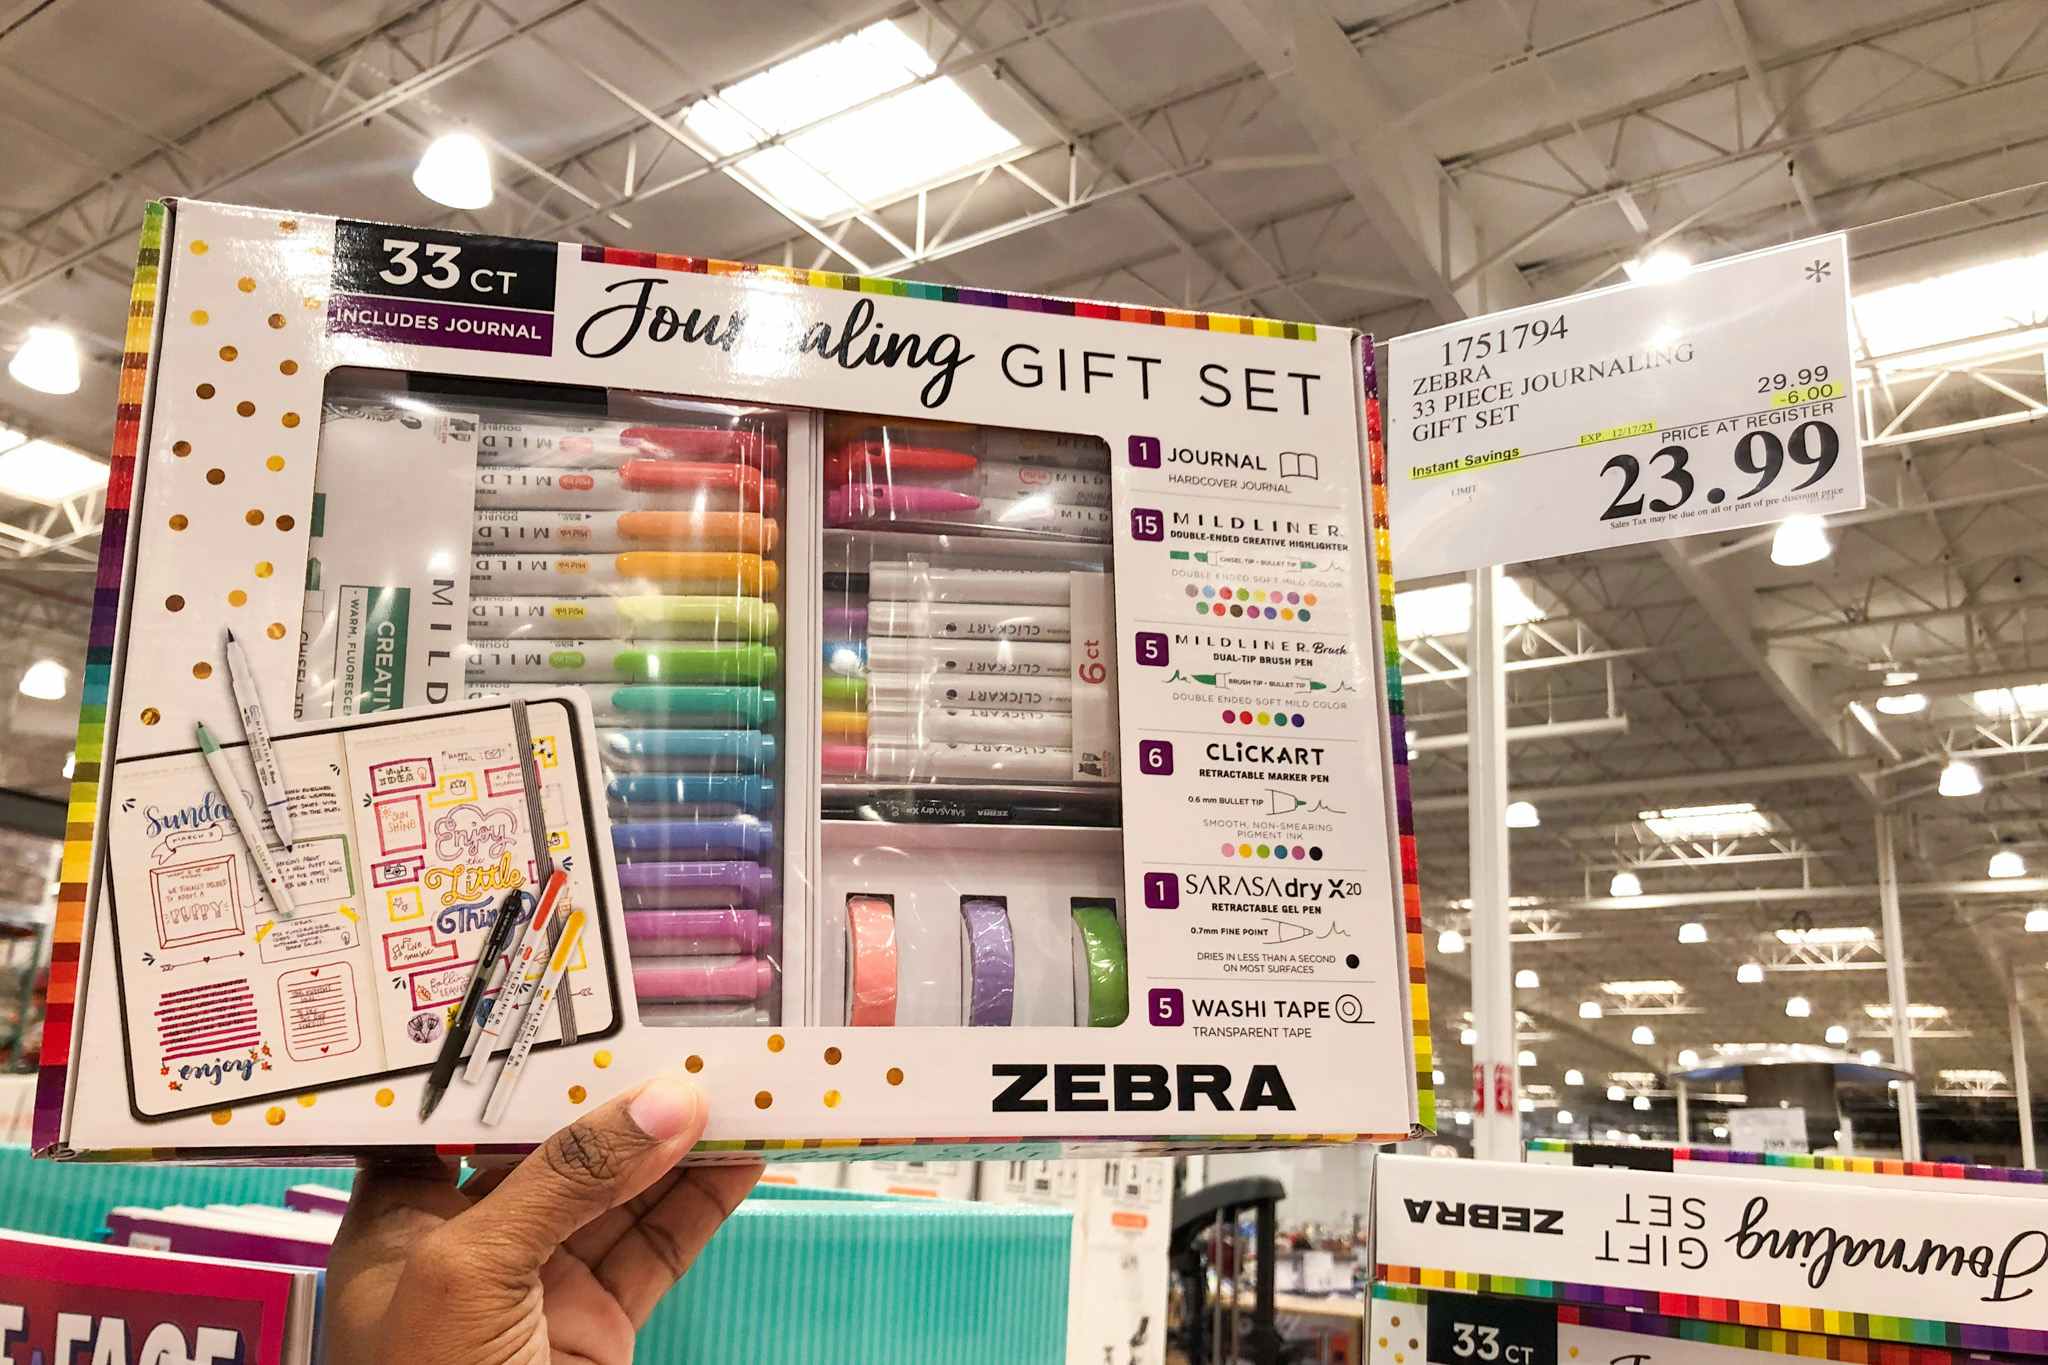 Zebra 33-Piece Journaling Gift Set, Just $23.99 at Costco (Reg. $29.99) -  The Krazy Coupon Lady